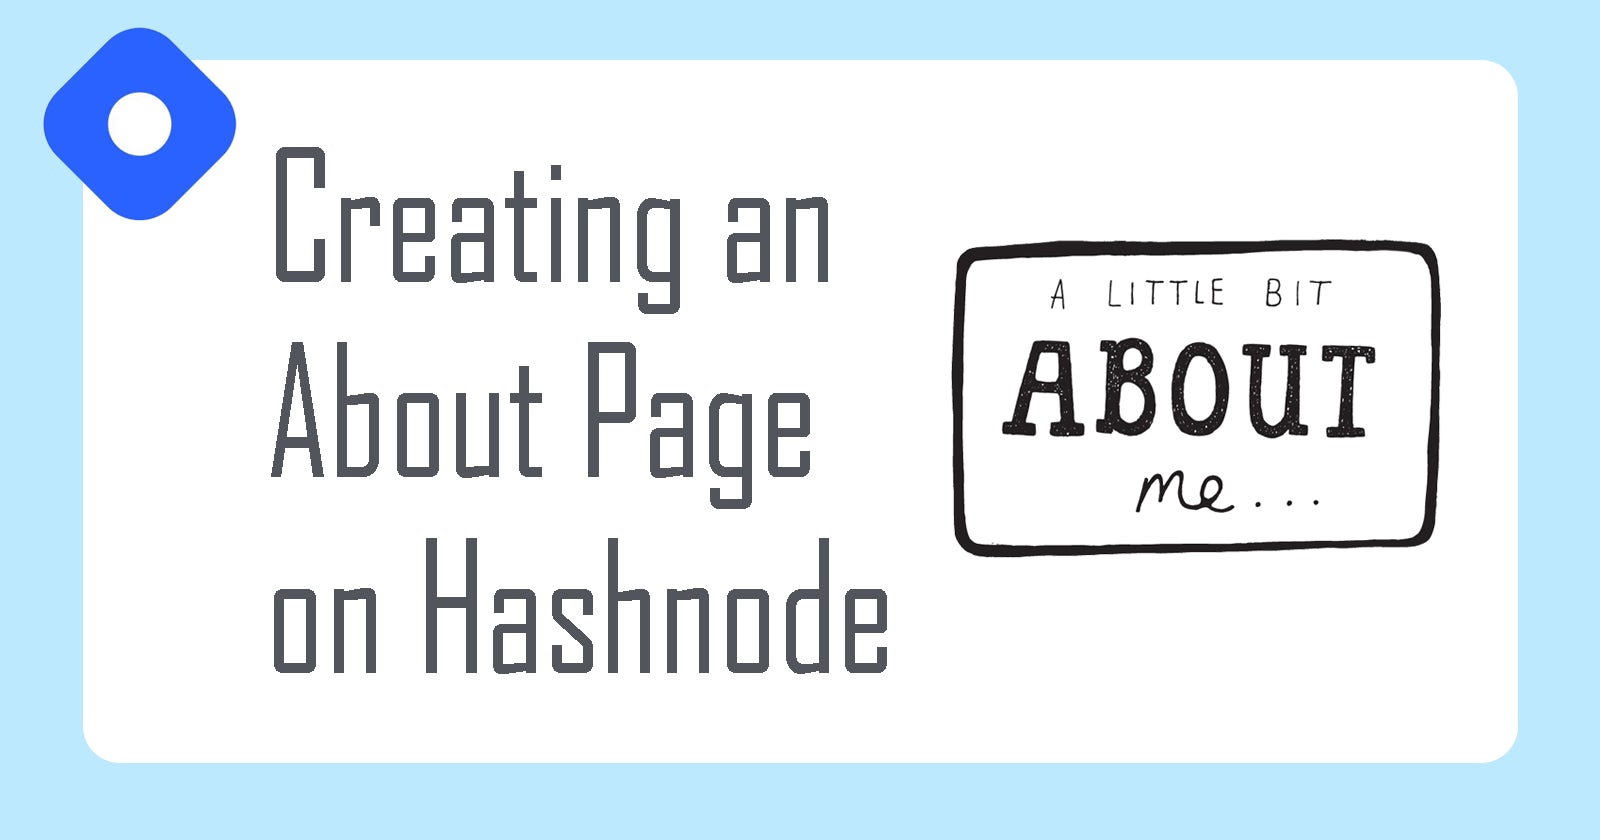 Creating an About page on your Hashnode Blog